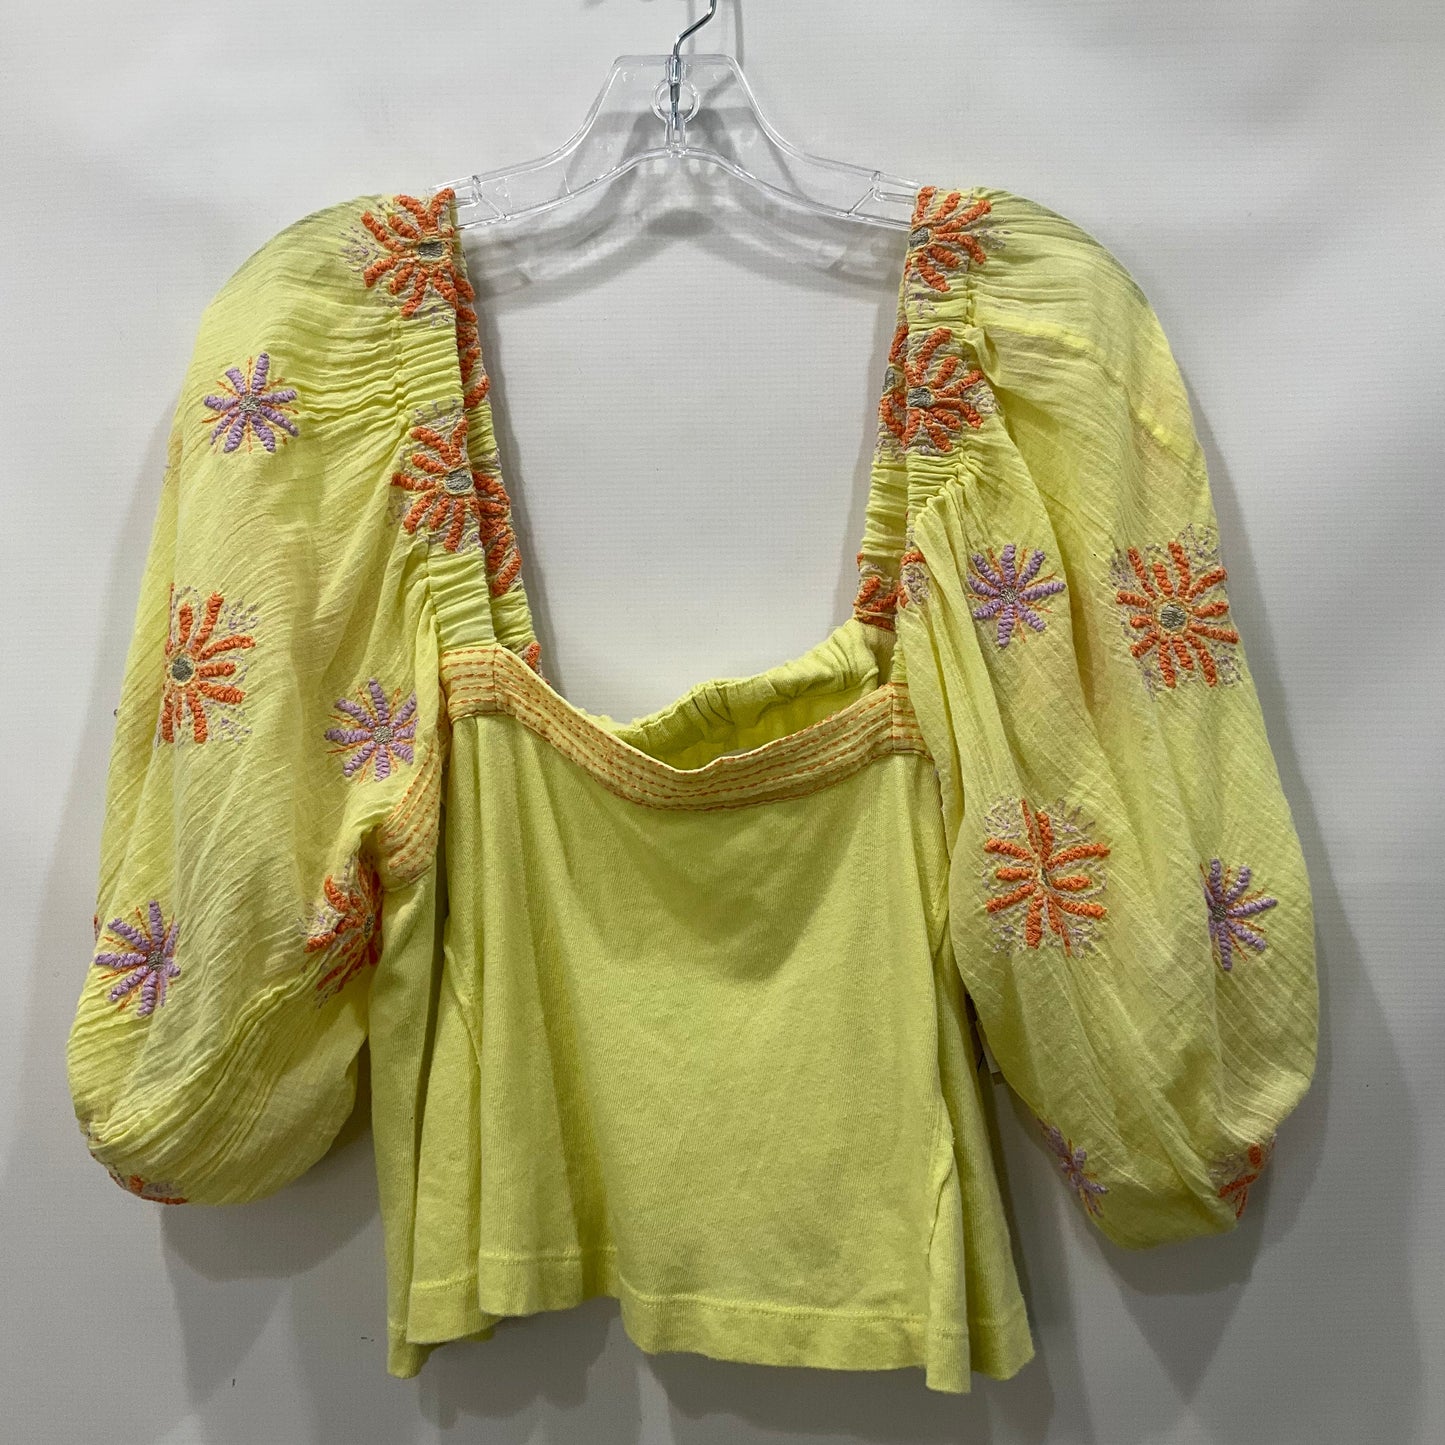 Yellow Top Short Sleeve Urban Outfitters, Size L